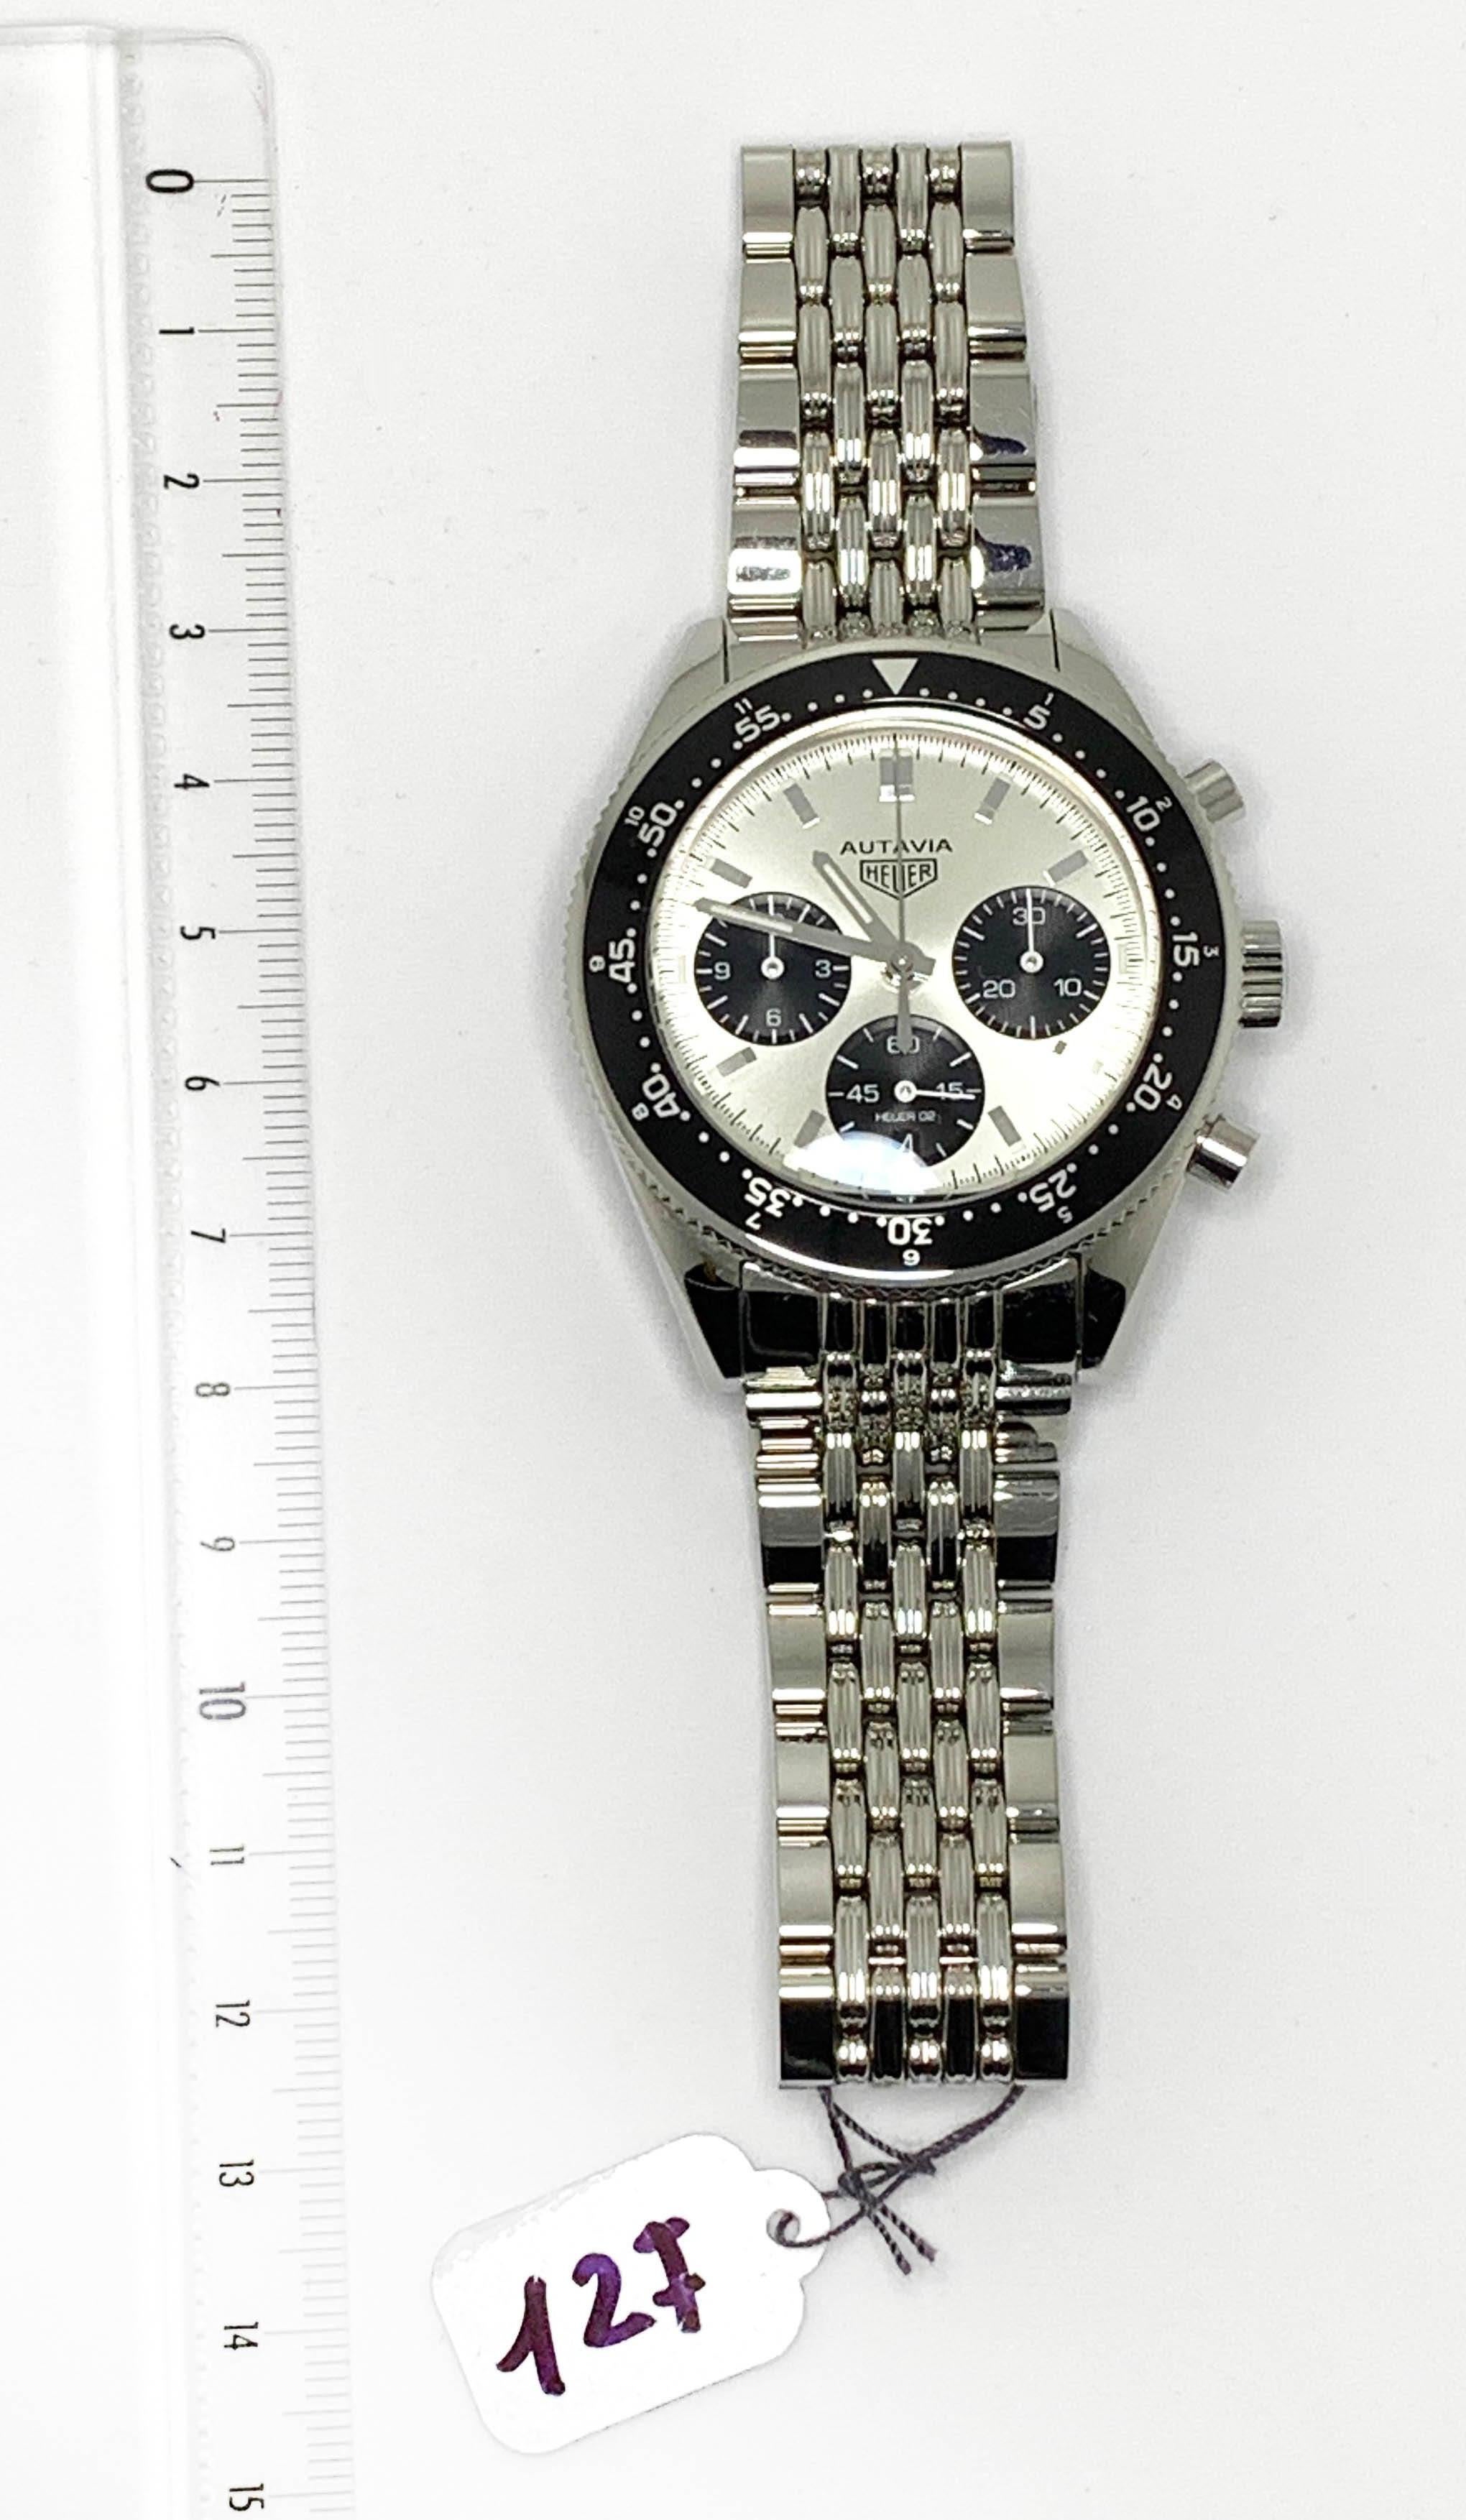 HEUER
Autavia
2 limited edition Jack Heuer
85th anniversary
steel/wristband steel
silver dial
3 black meters
automatic
new / box / papers
4100 euros